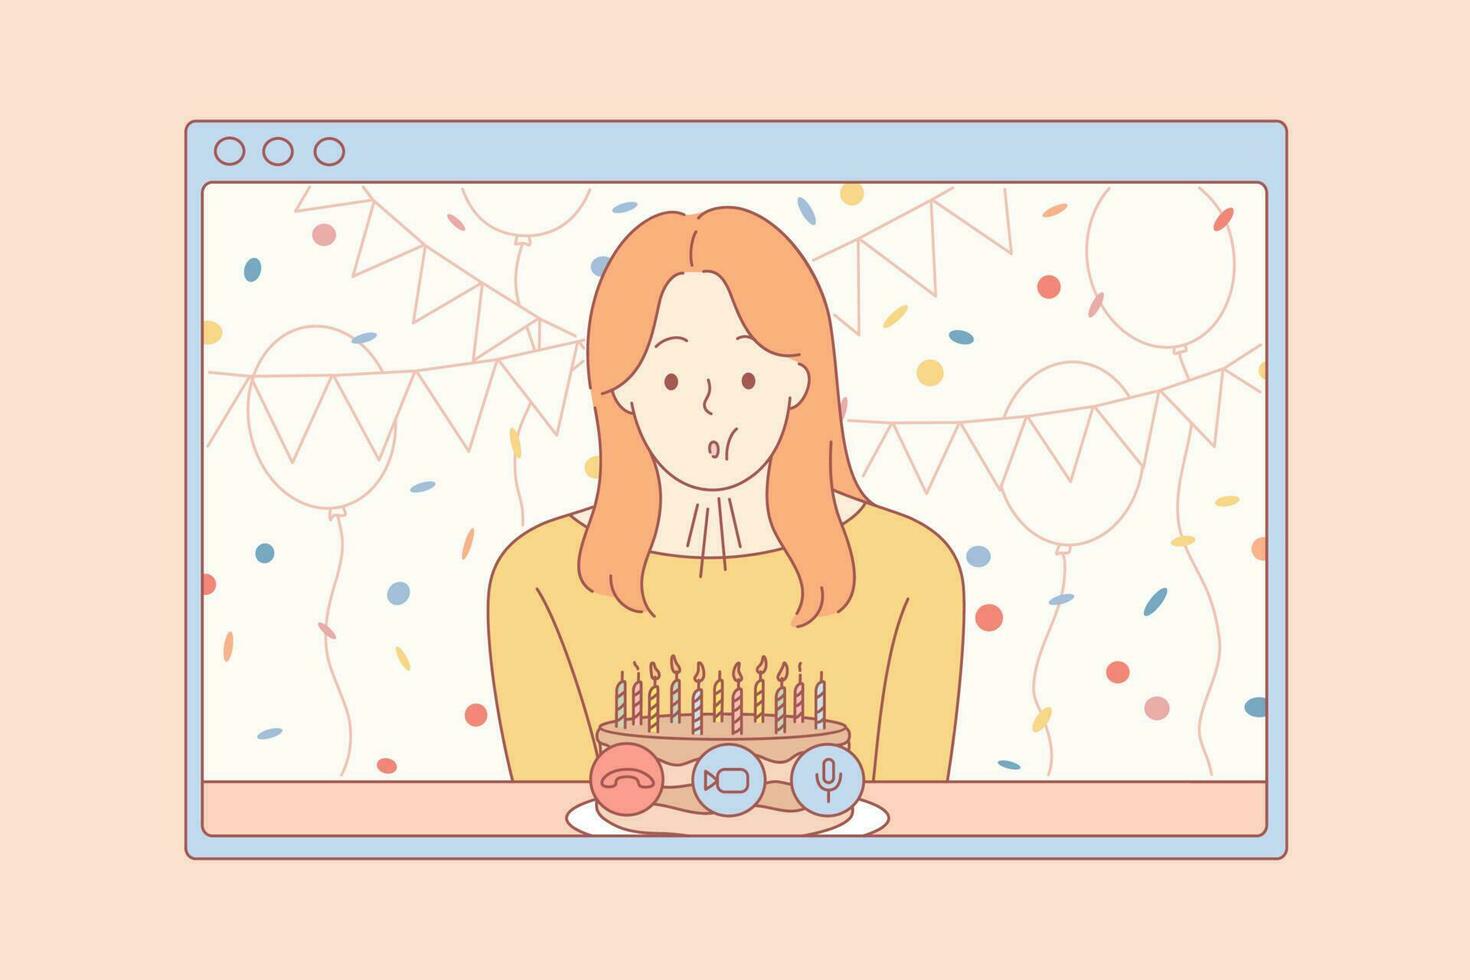 Celebration, online, birthday, holiday, quarantine, coronavirus concept. Young woman girl cartoon character celebrates birthday remotely blowing cake candles. Self isolation party on 2019ncov lockdown vector